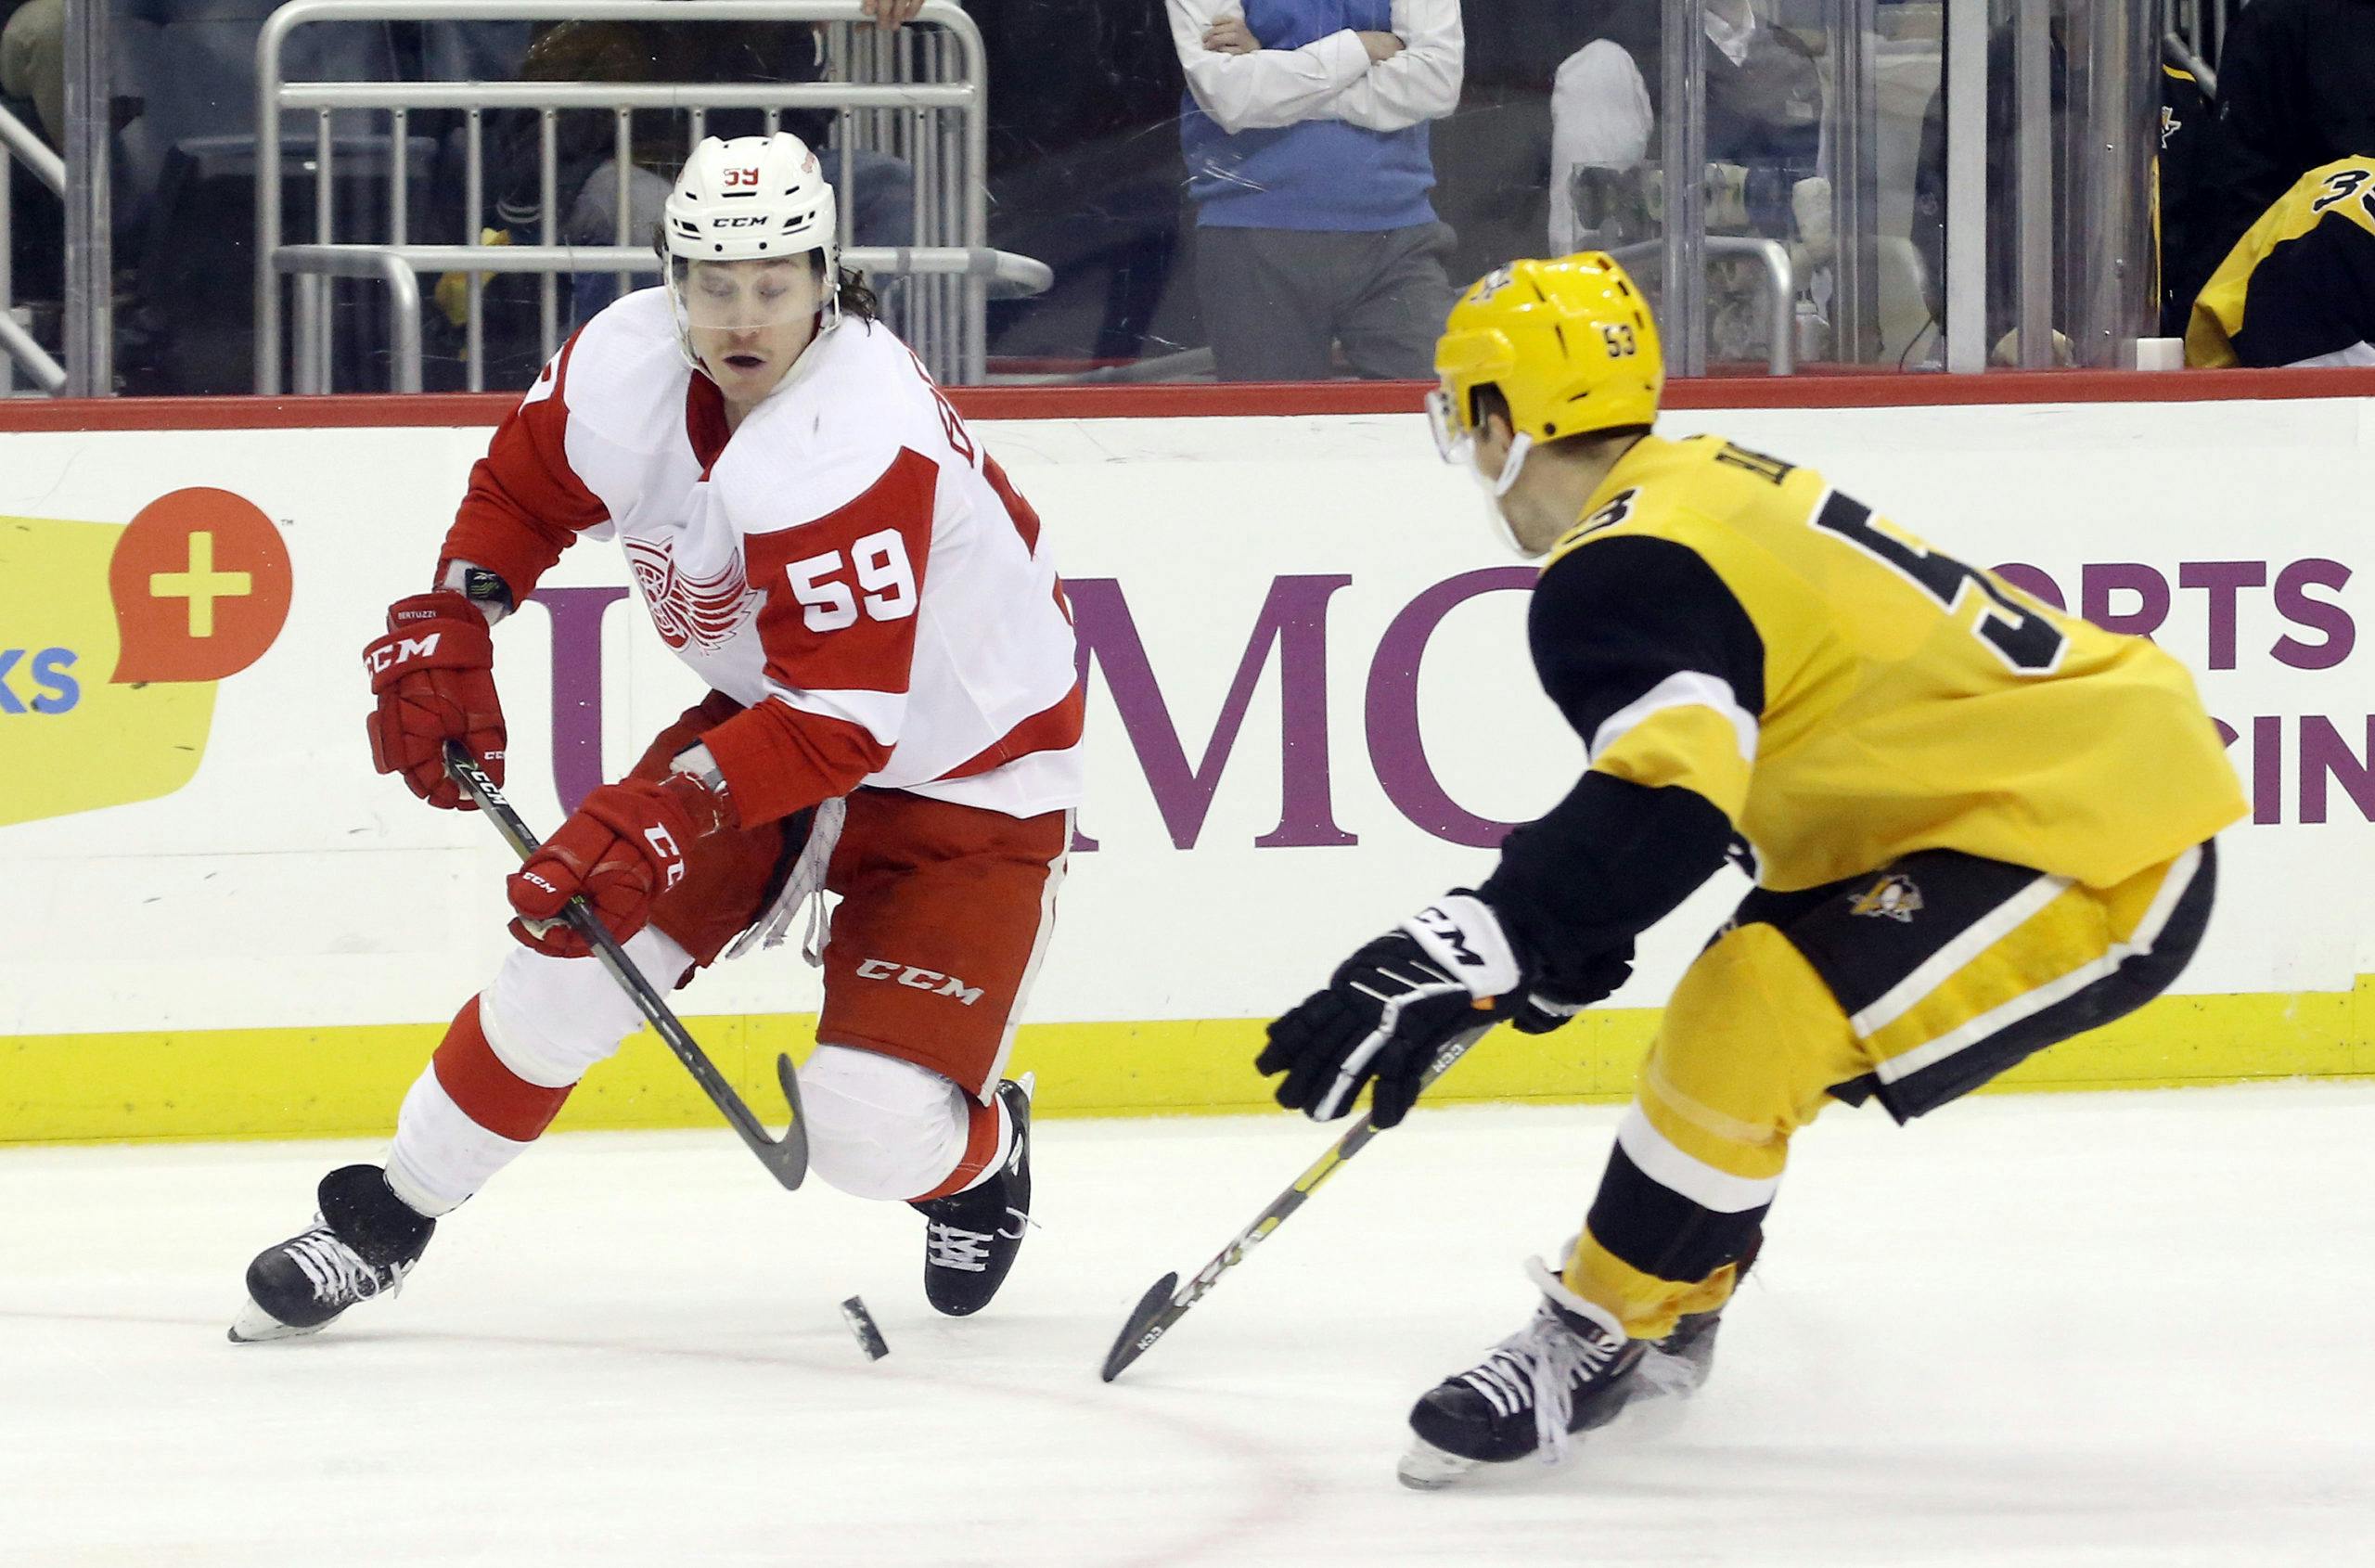 Detroit Red Wings left wing Tyler Bertuzzi (59) skates with the puck against Pittsburgh Penguins center Teddy Blueger (53) during the first period at PPG PAINTS Arena. Mandatory Credit: Charles LeClaire-USA TODAY Sports